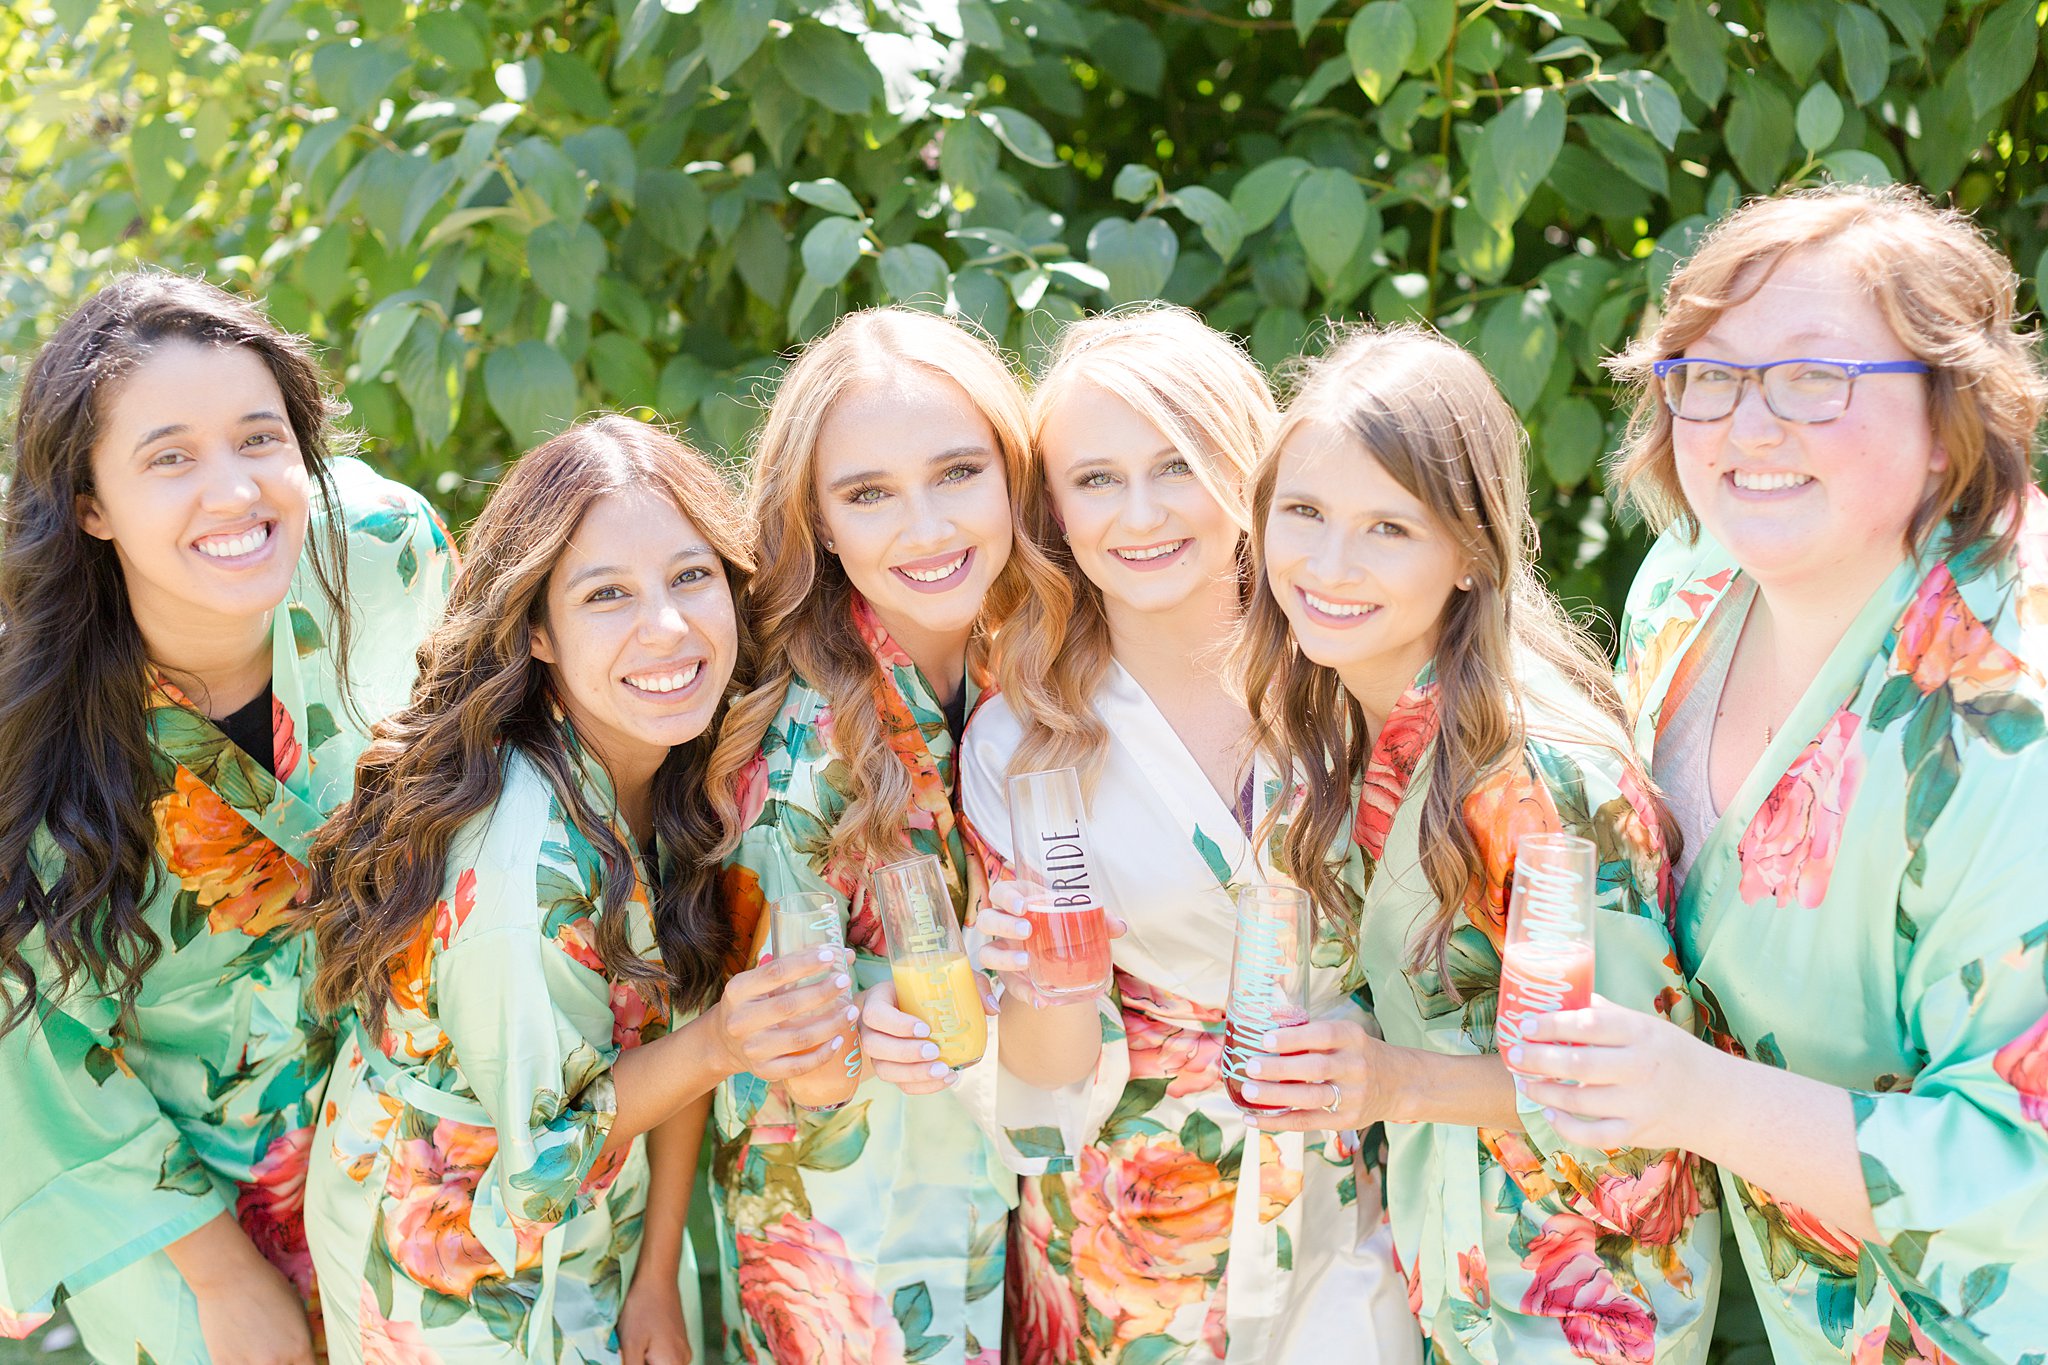 Bridesmaids giggling in matching robes